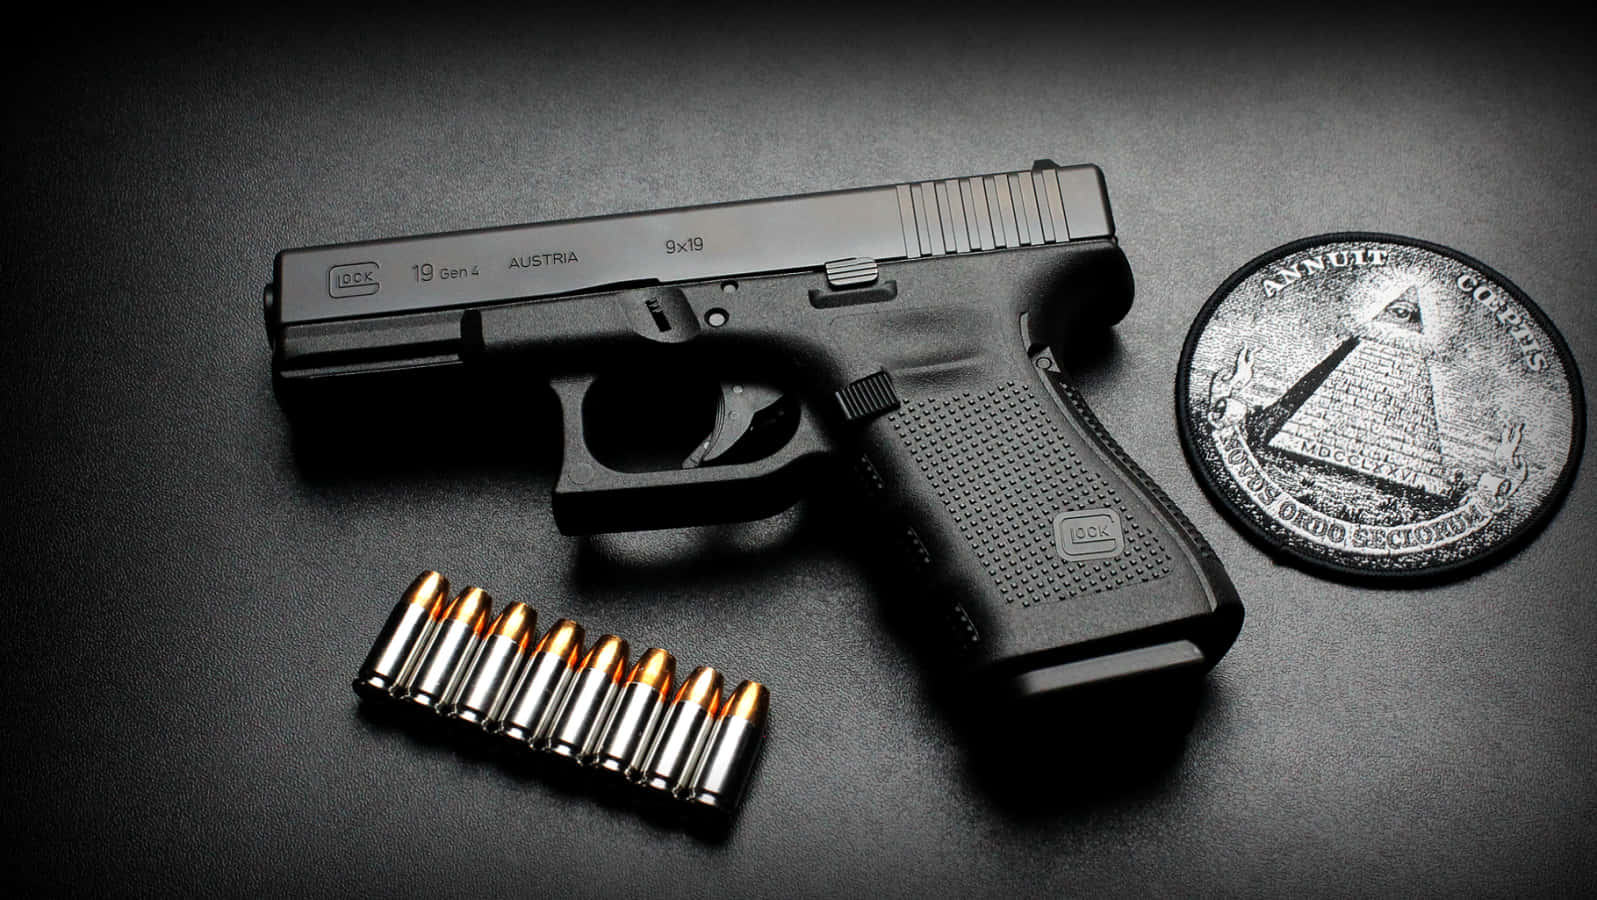 Glock 19 - A Reliable and Accurate Semi-Automatic Handgun